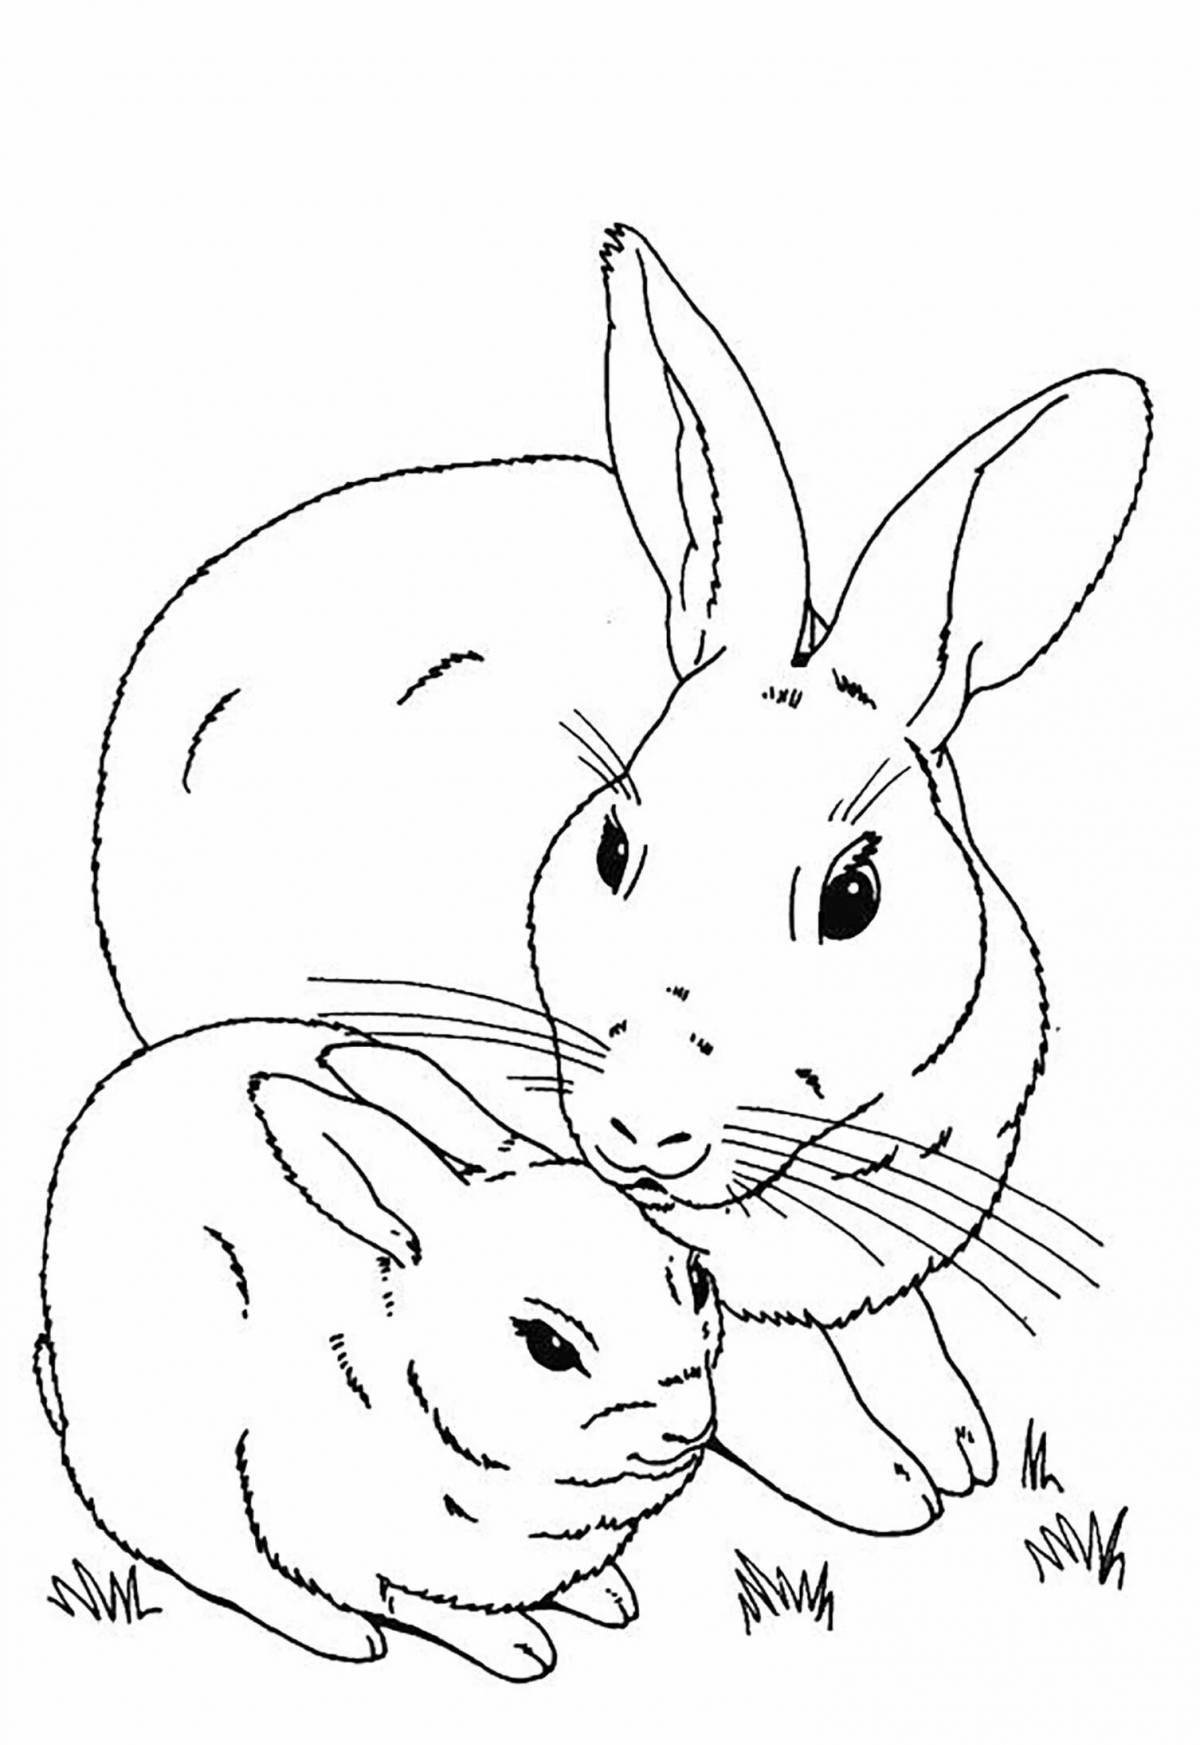 Naughty bunny coloring book for kids